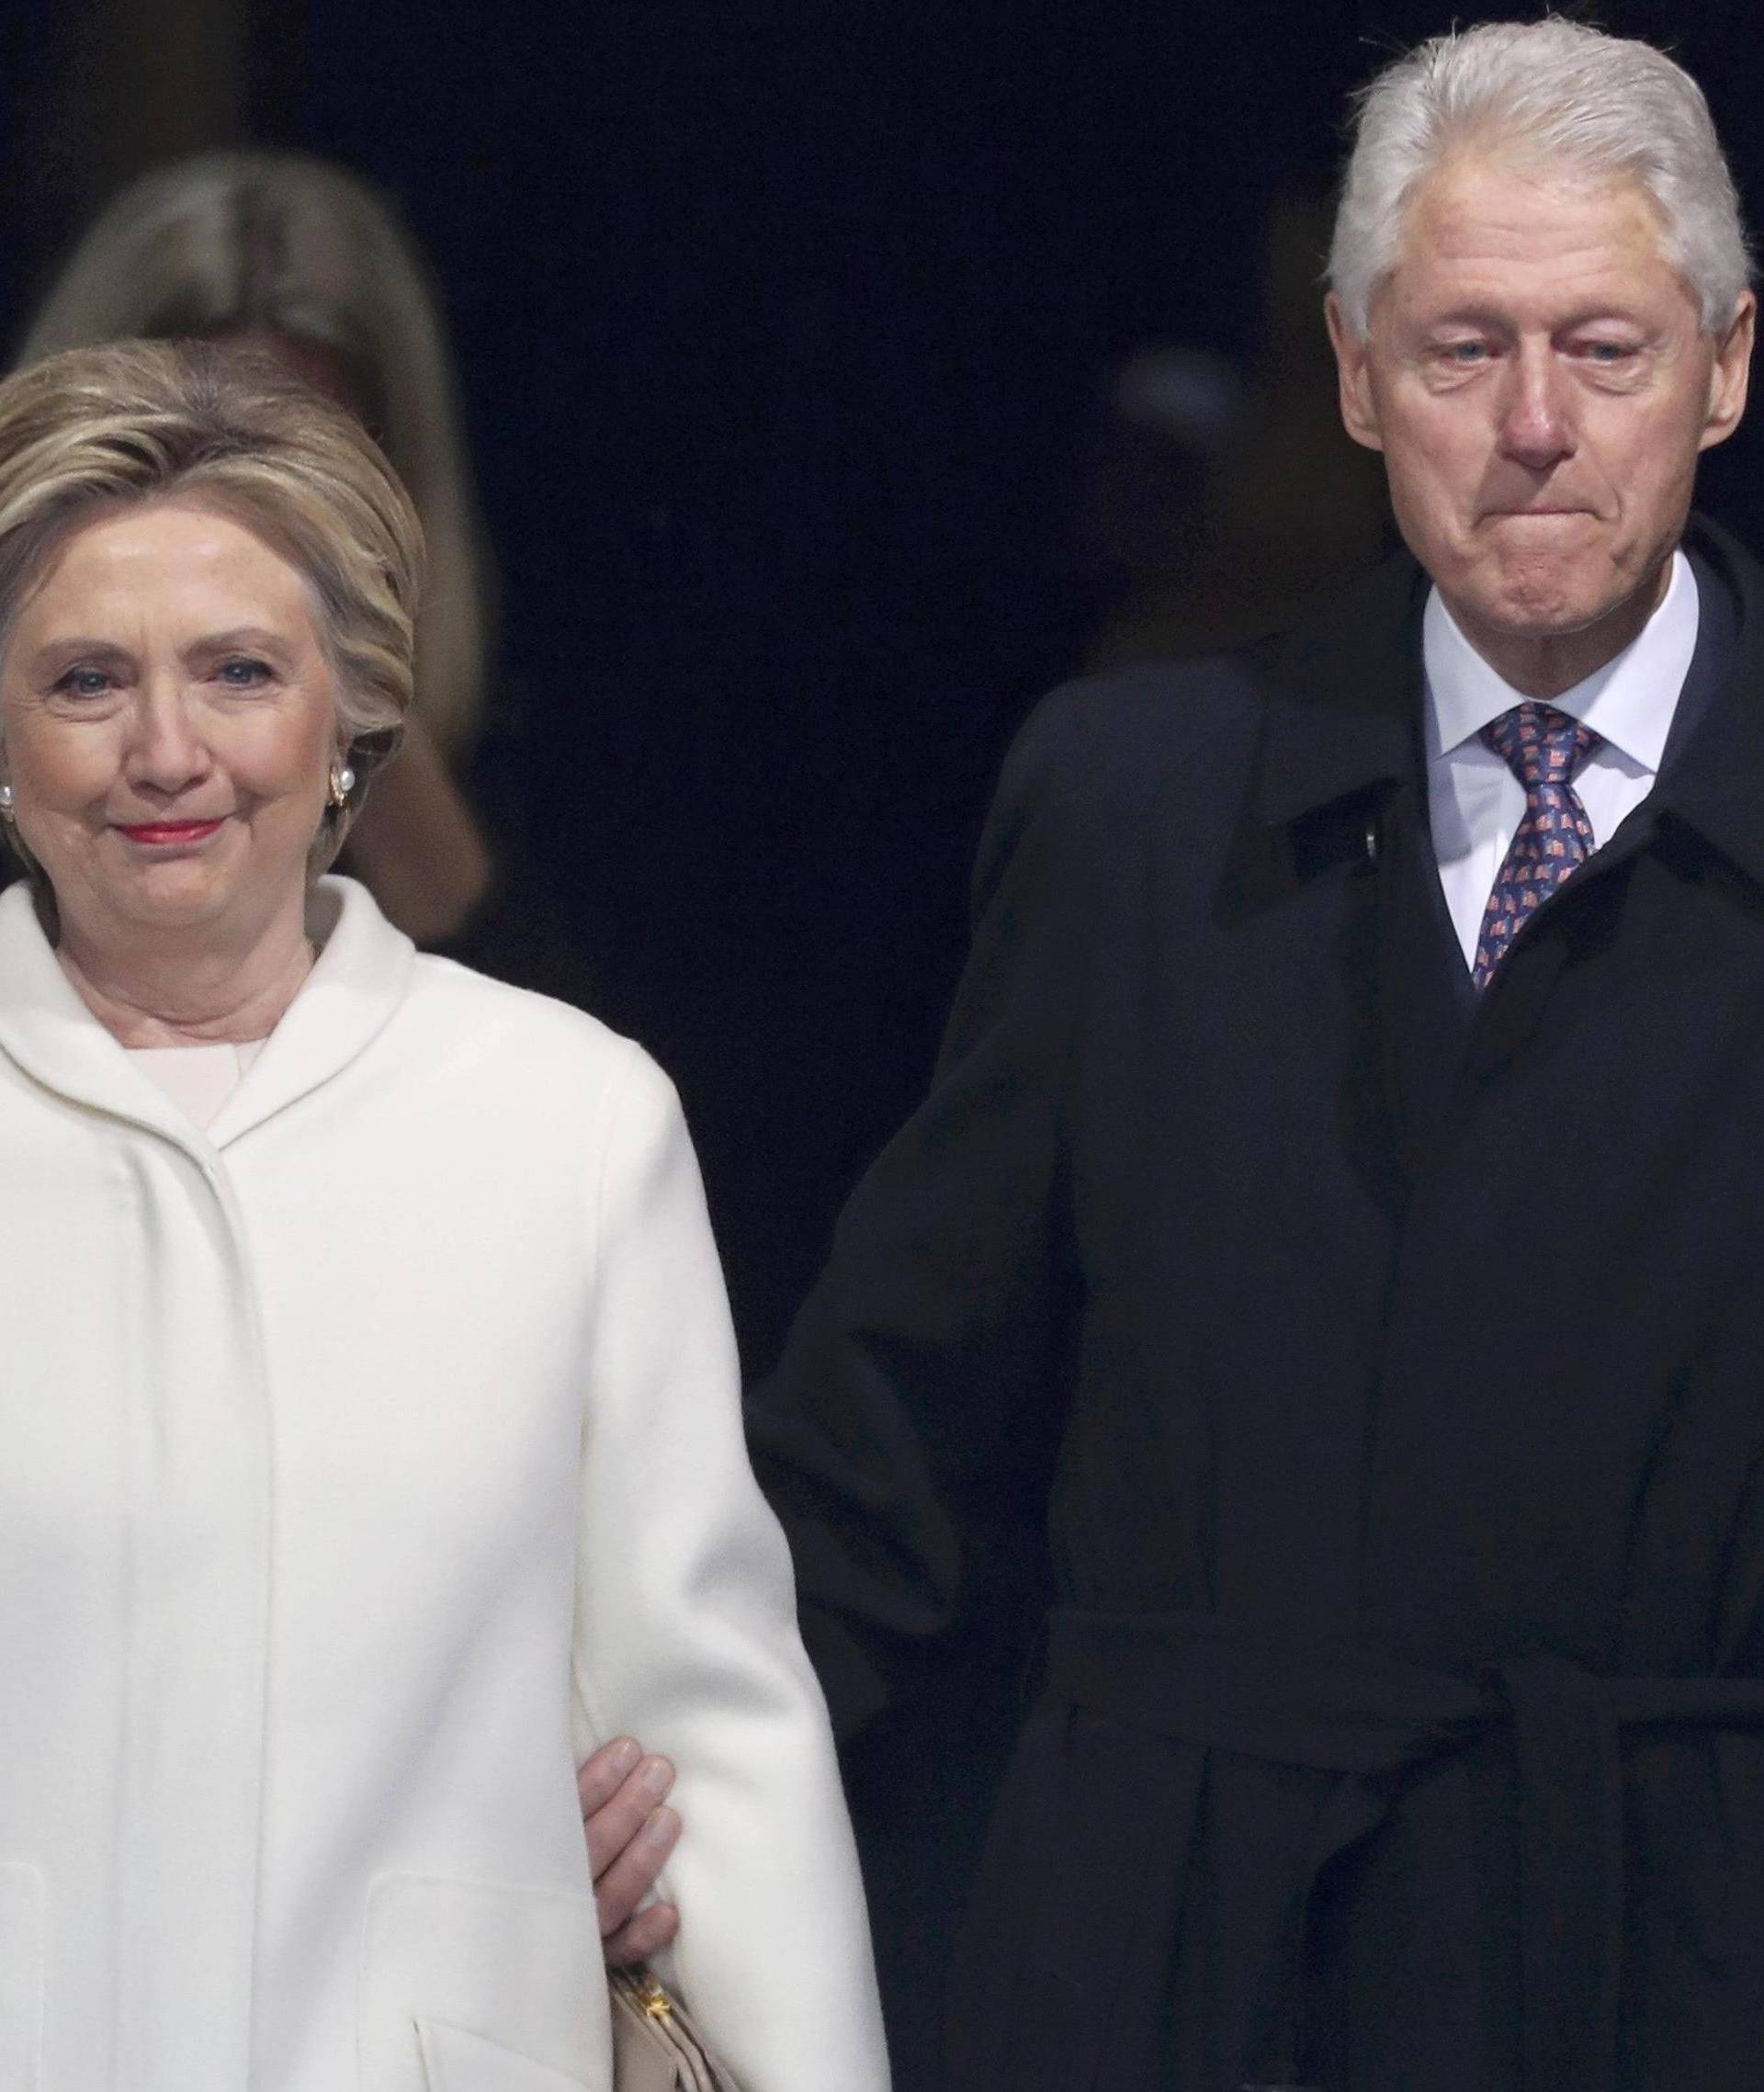 Former president Bill Clinton and former Democratic presidential candidate Hillary Clinton arrive at inauguration ceremonies swearing in Donald Trump as the 45th president of the United States on the West front of the U.S. Capitol in Washington